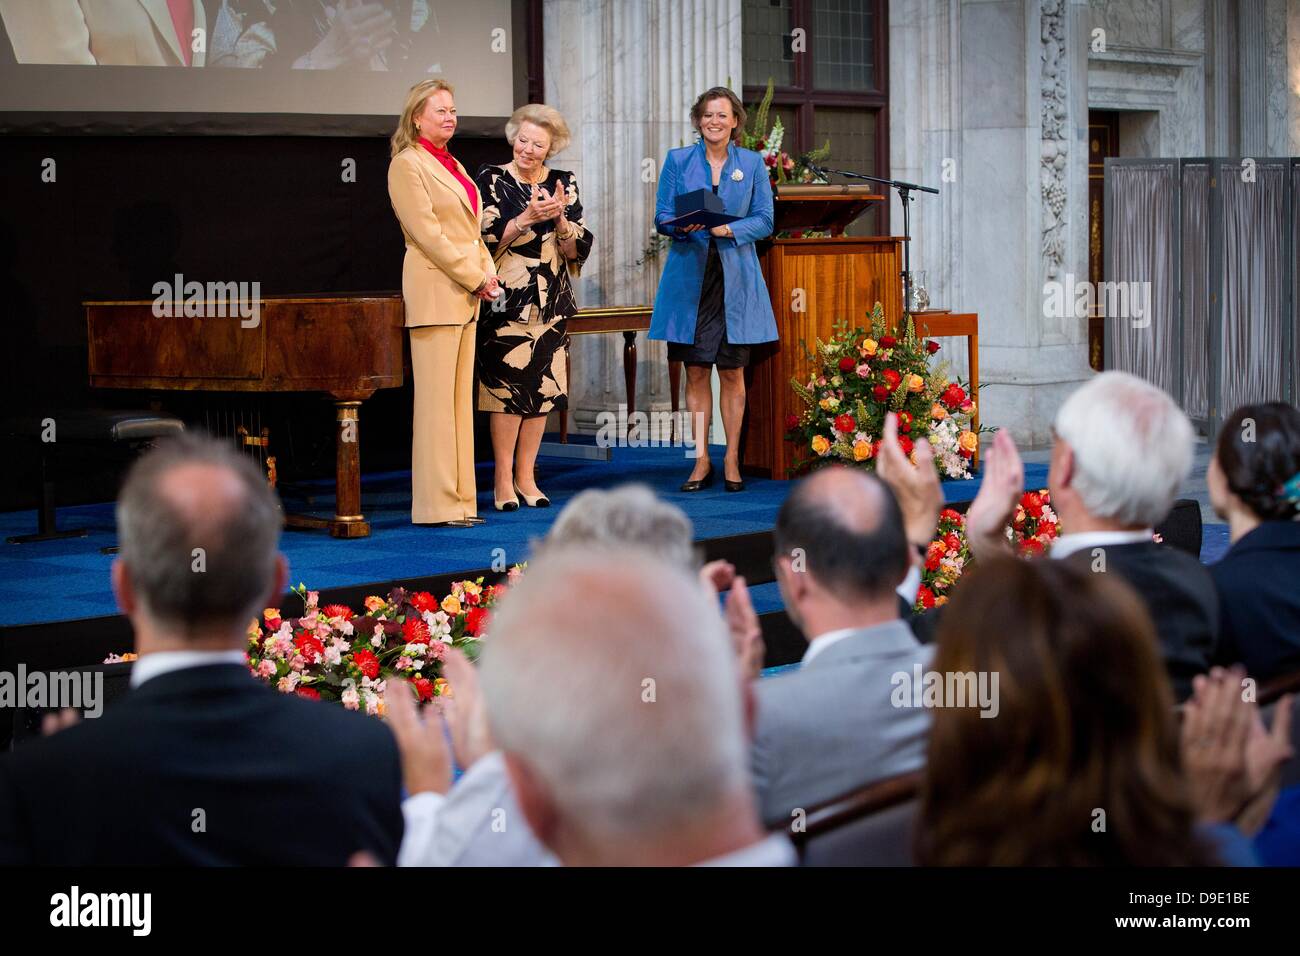 Princess Beatrix of The Netherlands attend the award ceremony of the Zilveren Anjer (silver carnation) Prince Bernhard cultuurfonds (culture foundation) at the Royal Palace Amsterdam, The Netherlands, 18 June 2013. The silver carnation is annually awarded to individuals who voluntarily worked for culture and nature conservation. Awardwinner Caroline de Westenholz. Photo: Patrick van Katwijk / NETHERLANDS AND FRANCE; OUT/dpa/Alamy Live News Stock Photo